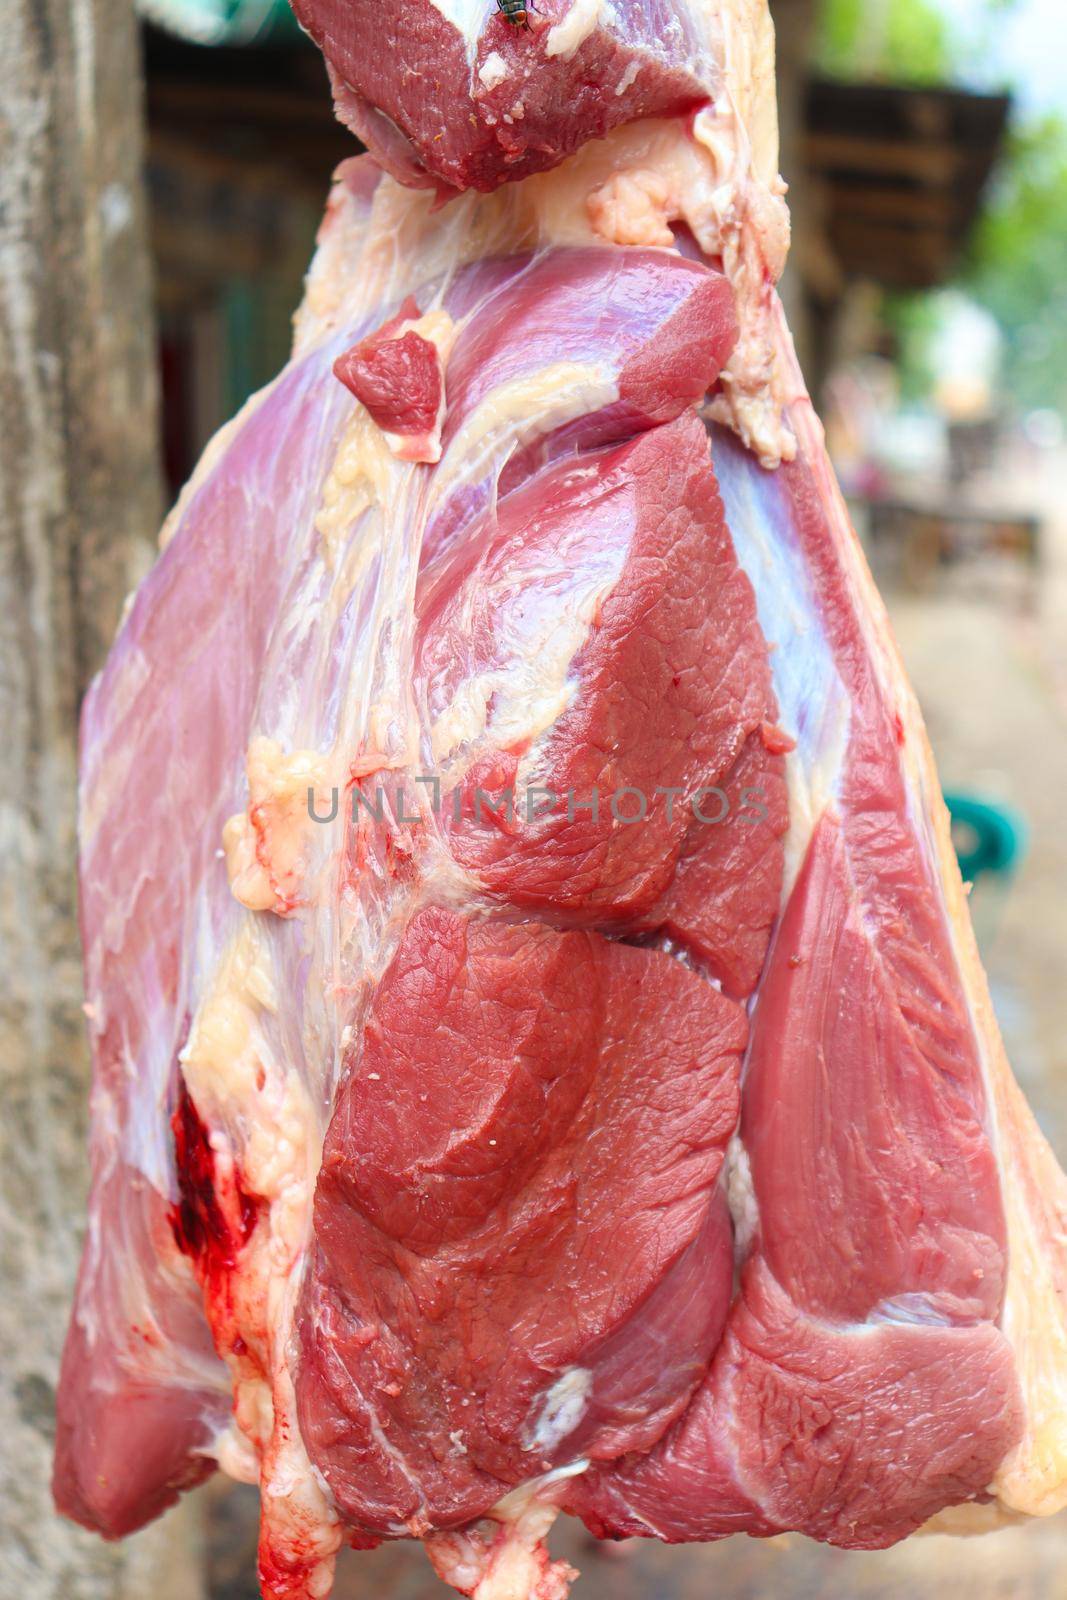 red colored beef closeup with hanging on shop for sell